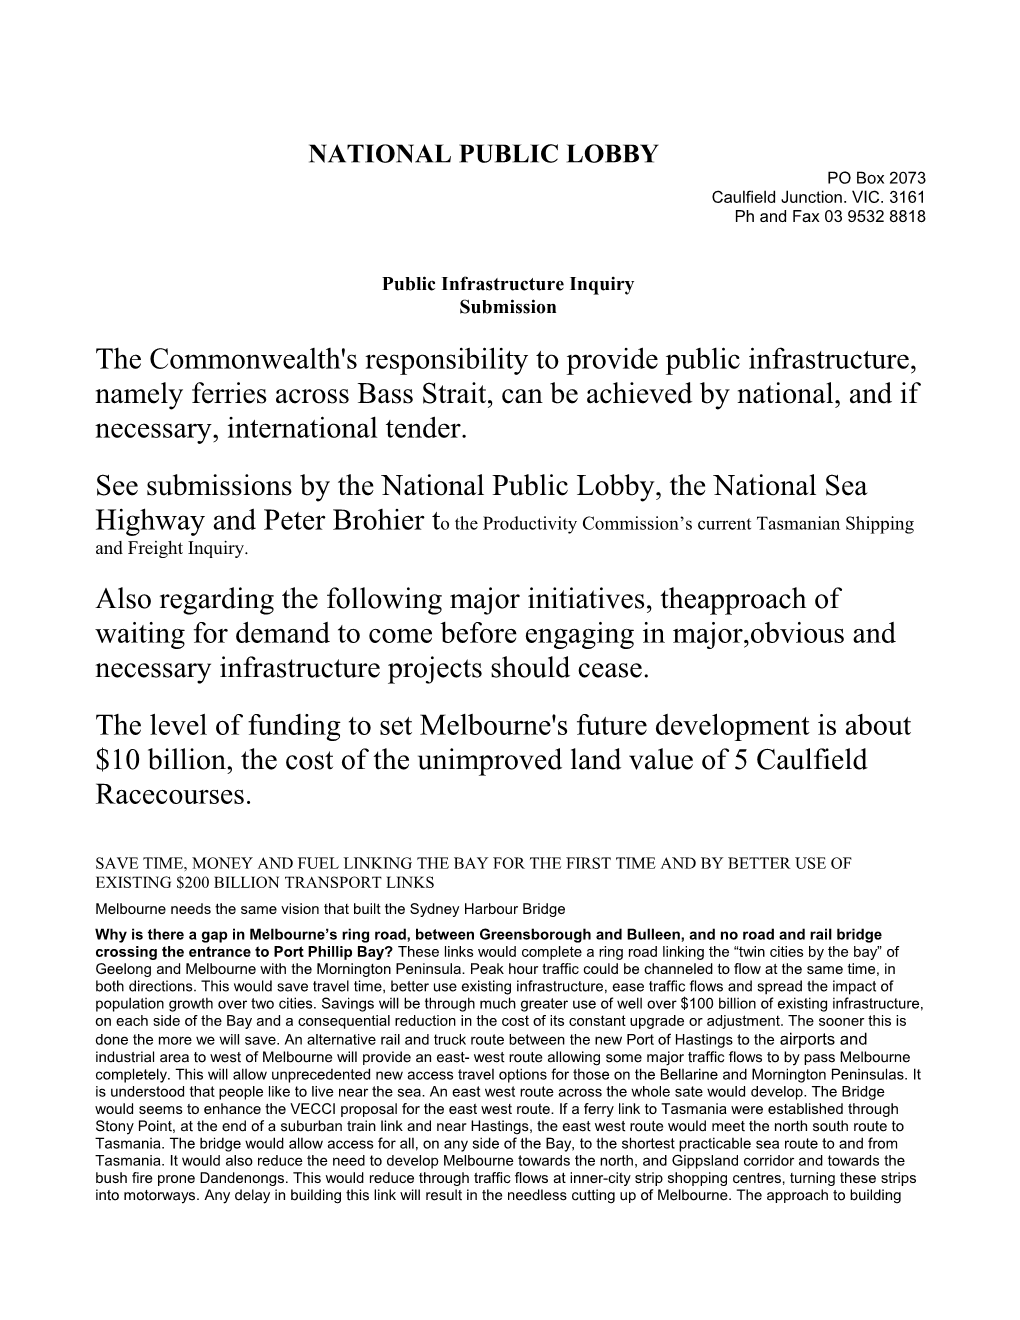 Submission 80 - National Public Lobby - Public Infrastructure - Public Inquiry